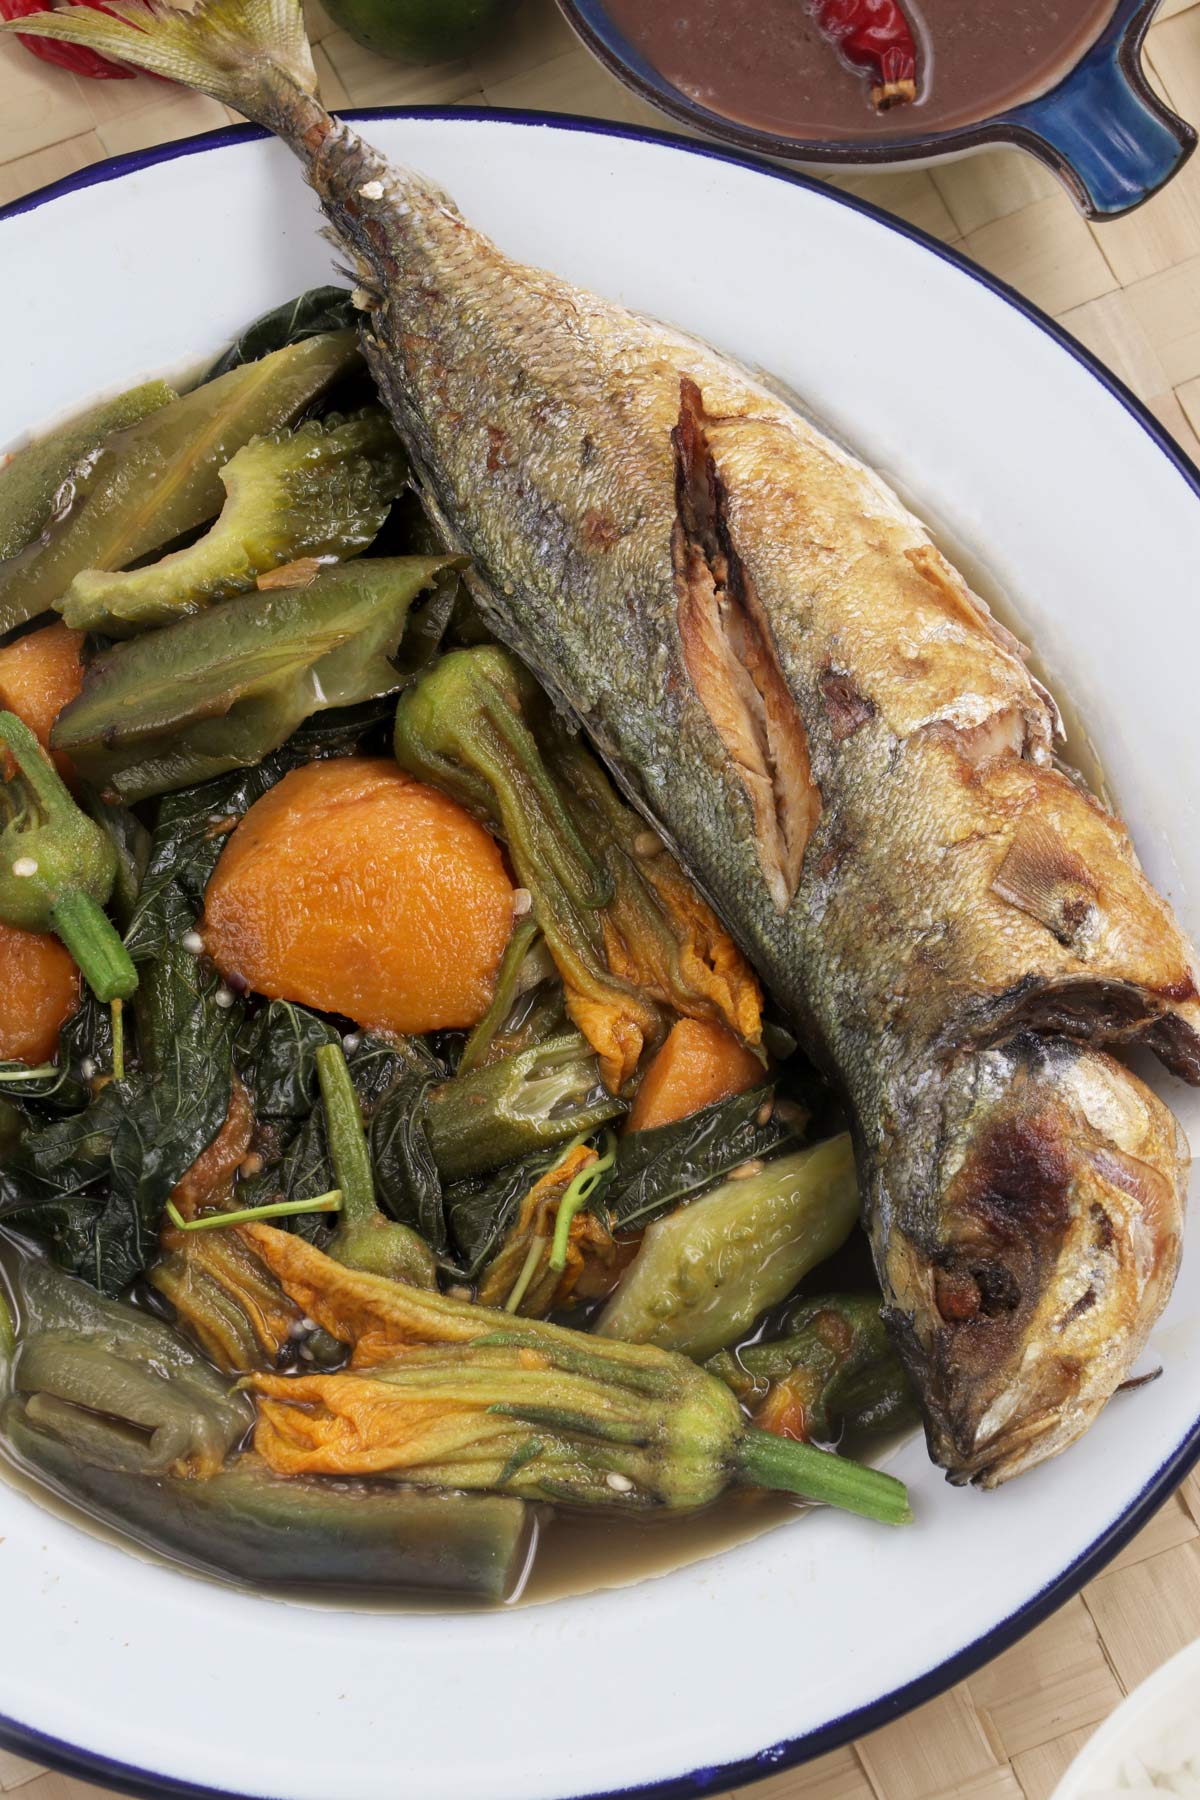 Dinengdeng with fried fish on a serving plate.